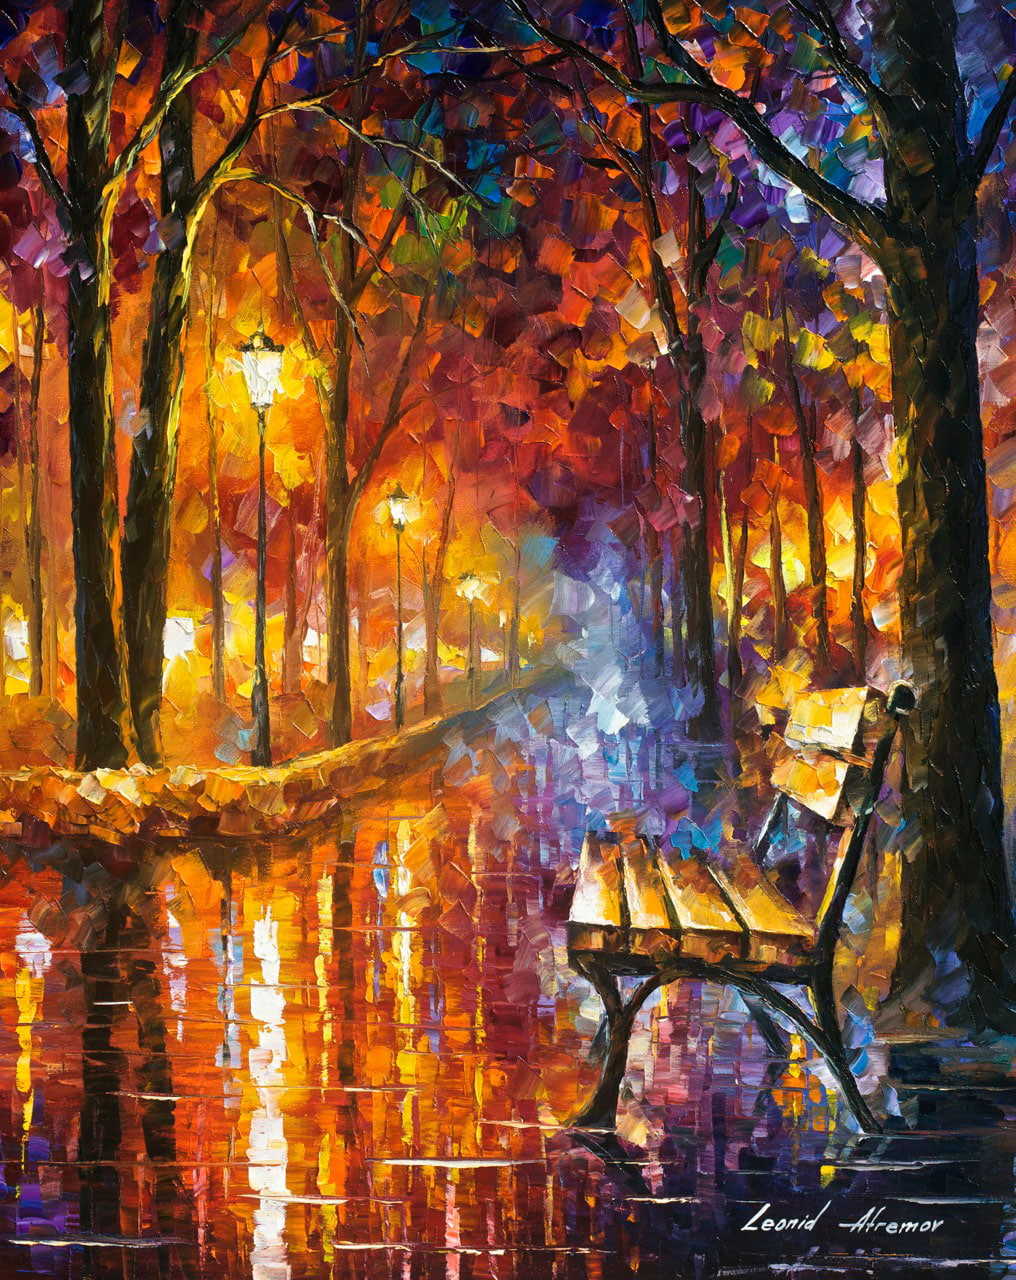 Leonid Afremov LONELINESS OF PASSION Paint By Numbers Full Kit